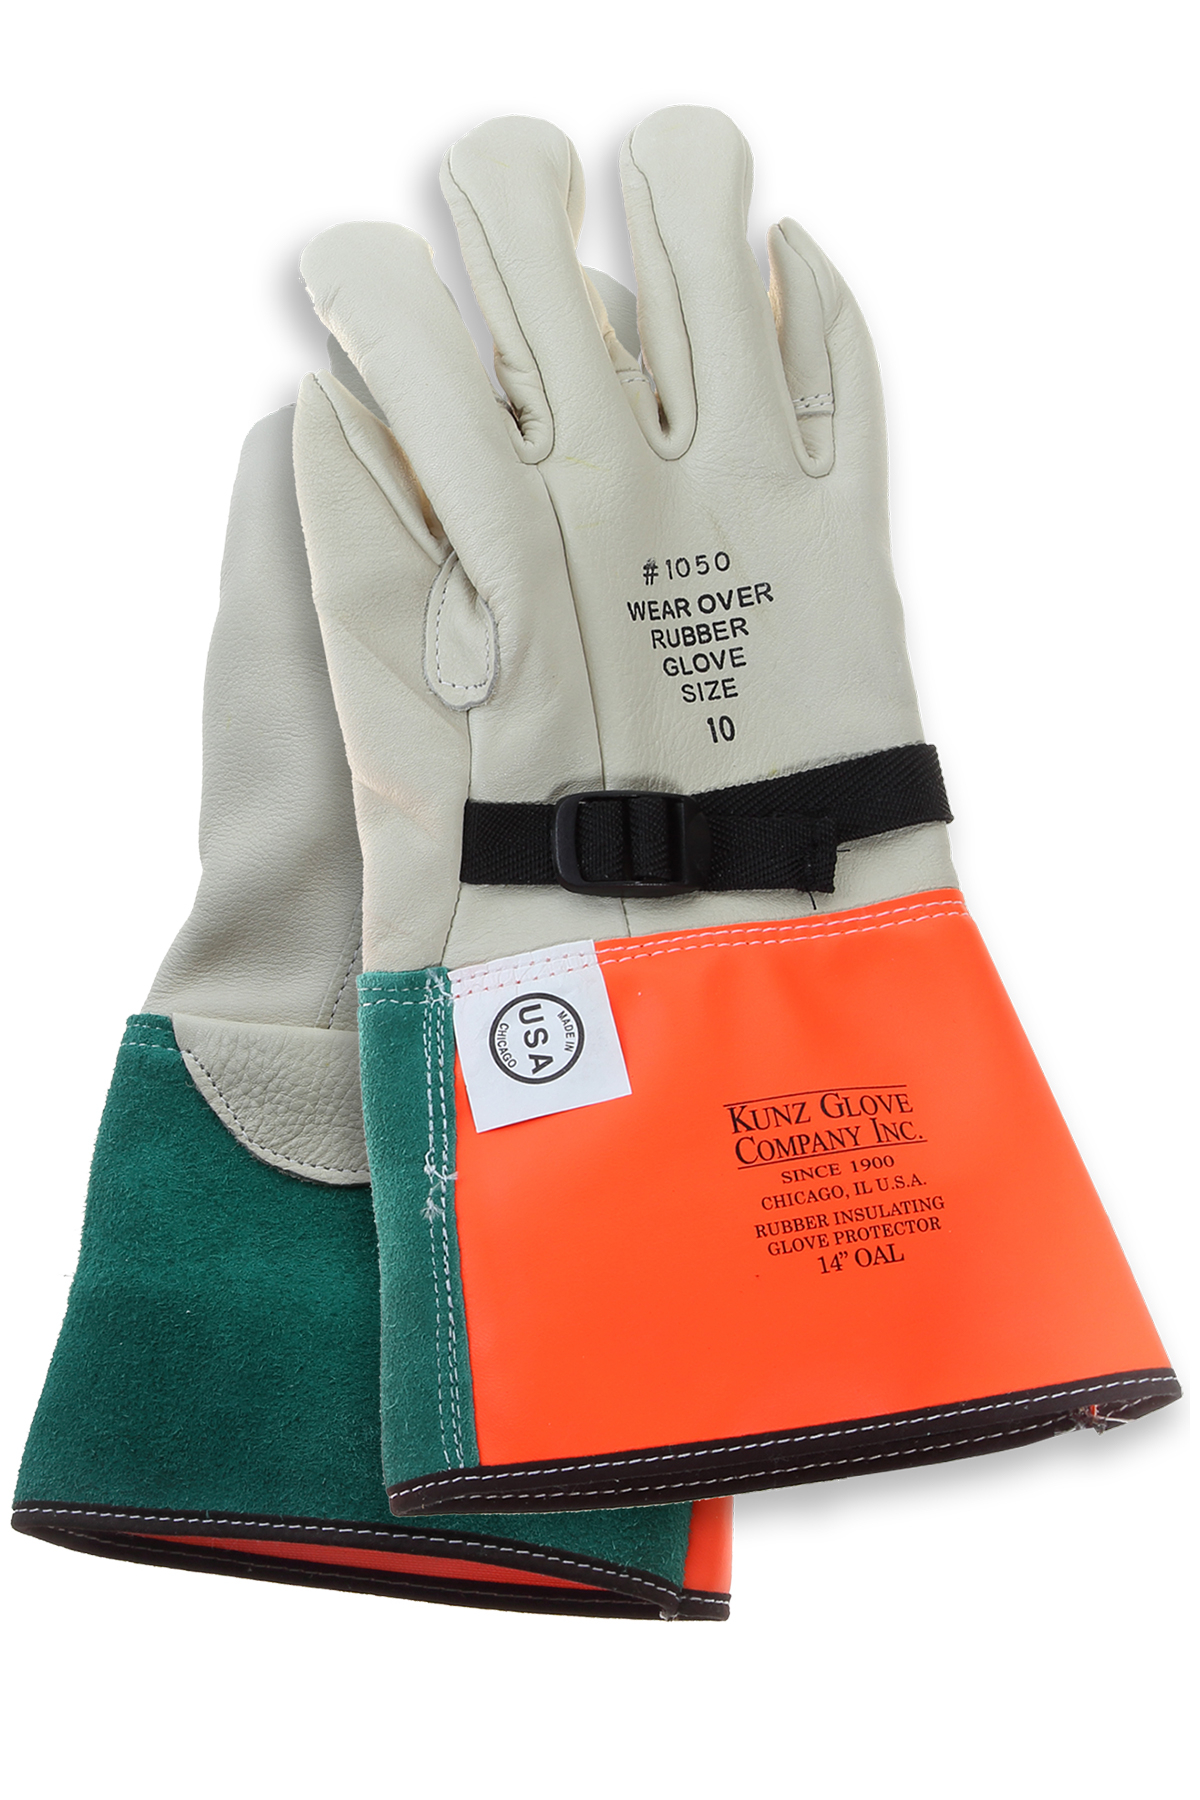 Kunz Cream Cowhide High Voltage Glove Protector from Columbia Safety